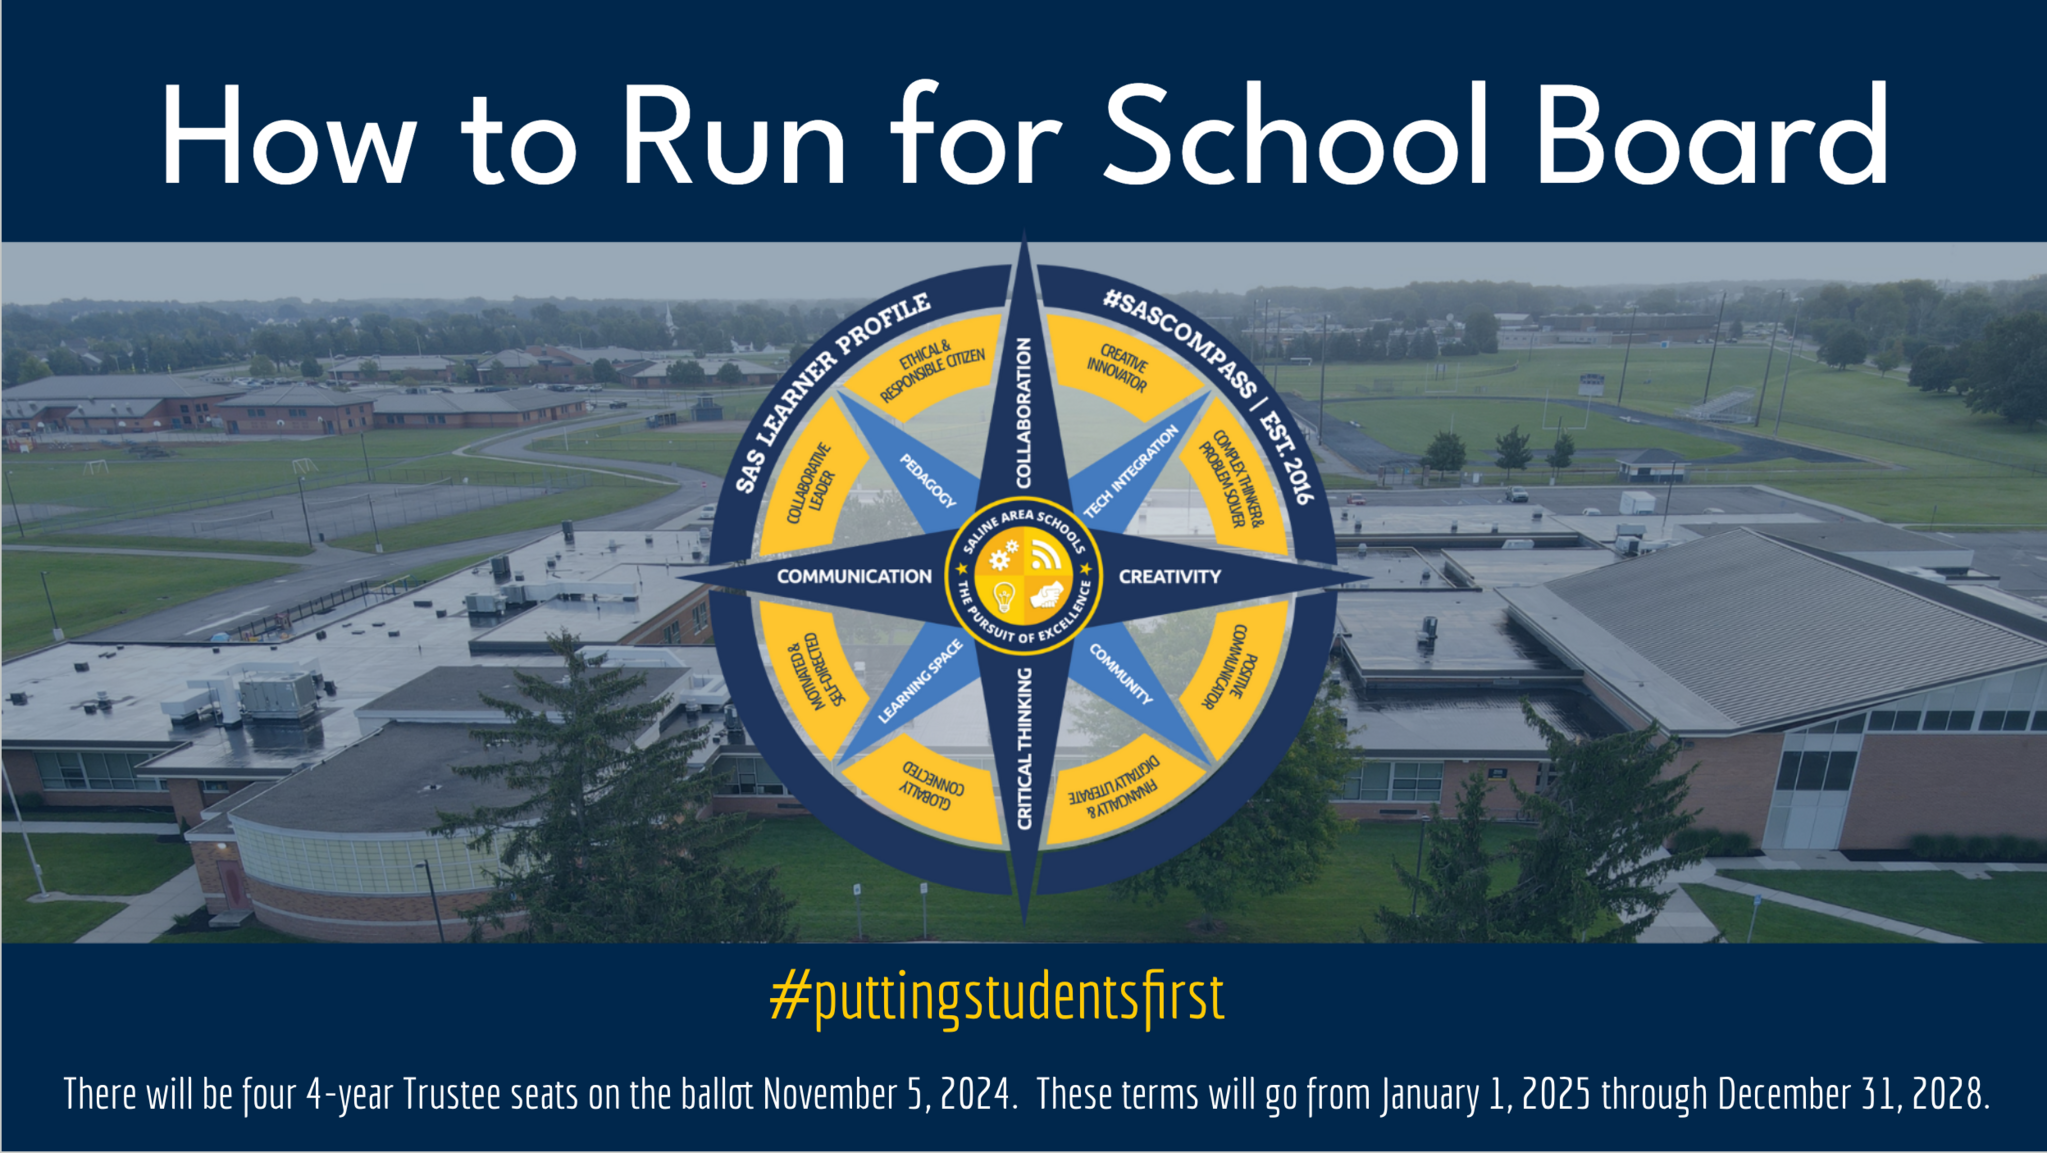 How to Run for School Board